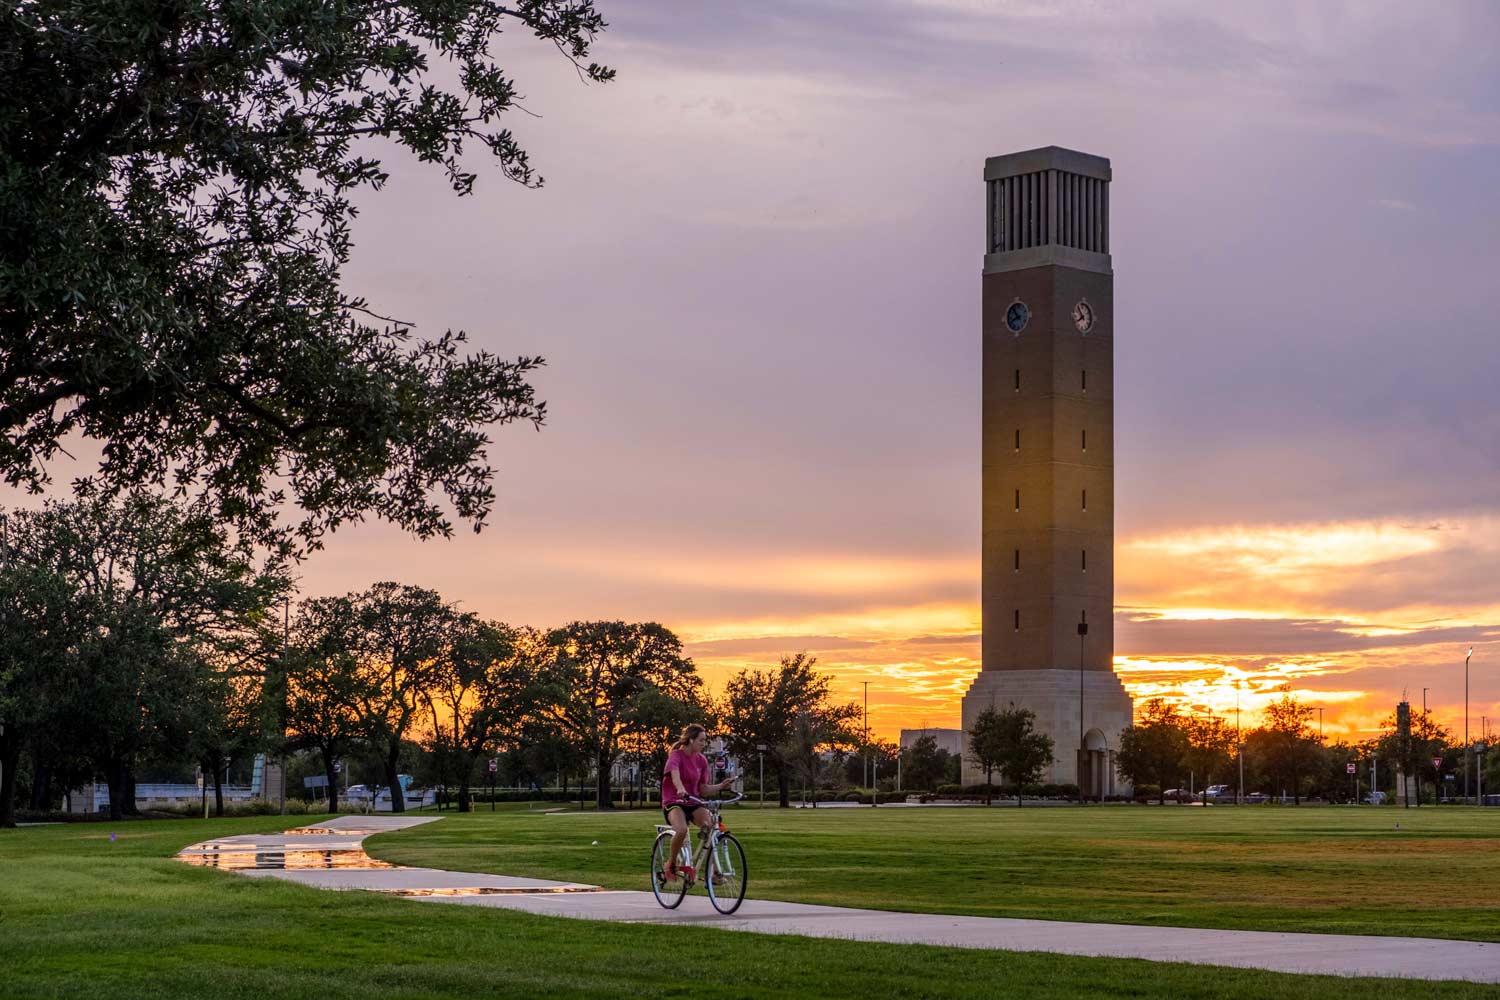 91Ƶ student rides a bike in front of Albritton Bell Tower during sunset.